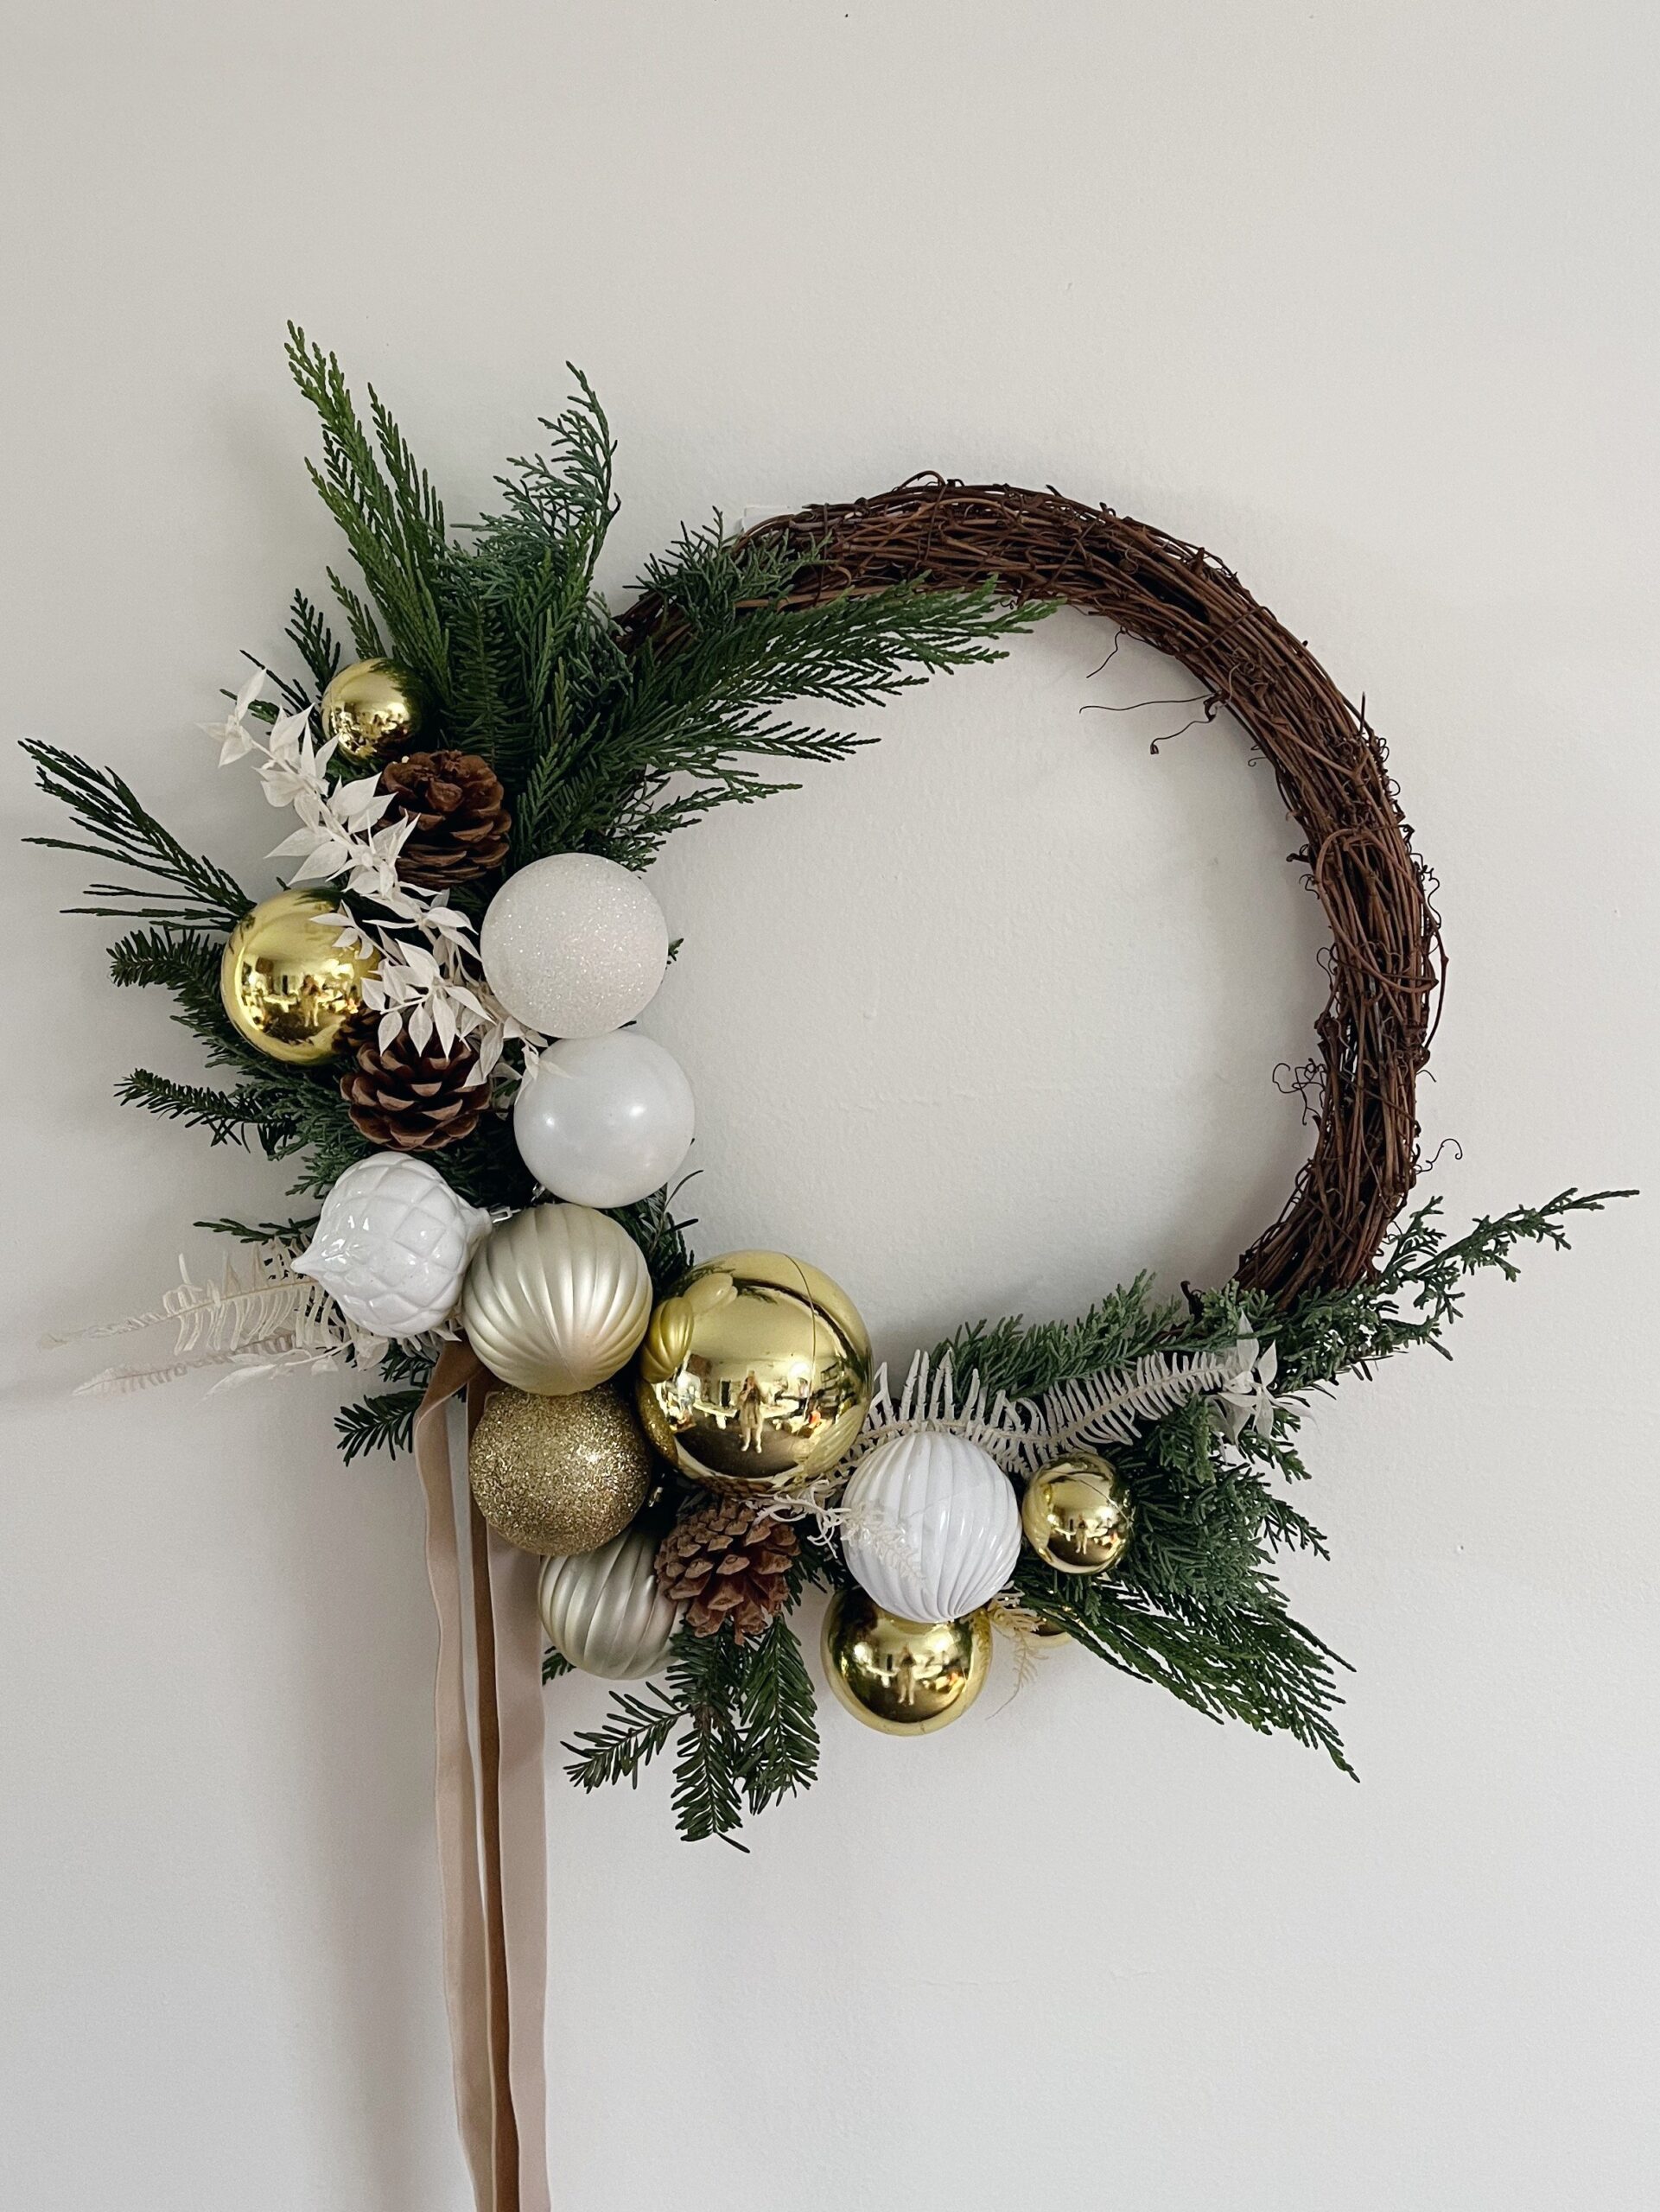 The Old Fashioned Wreath